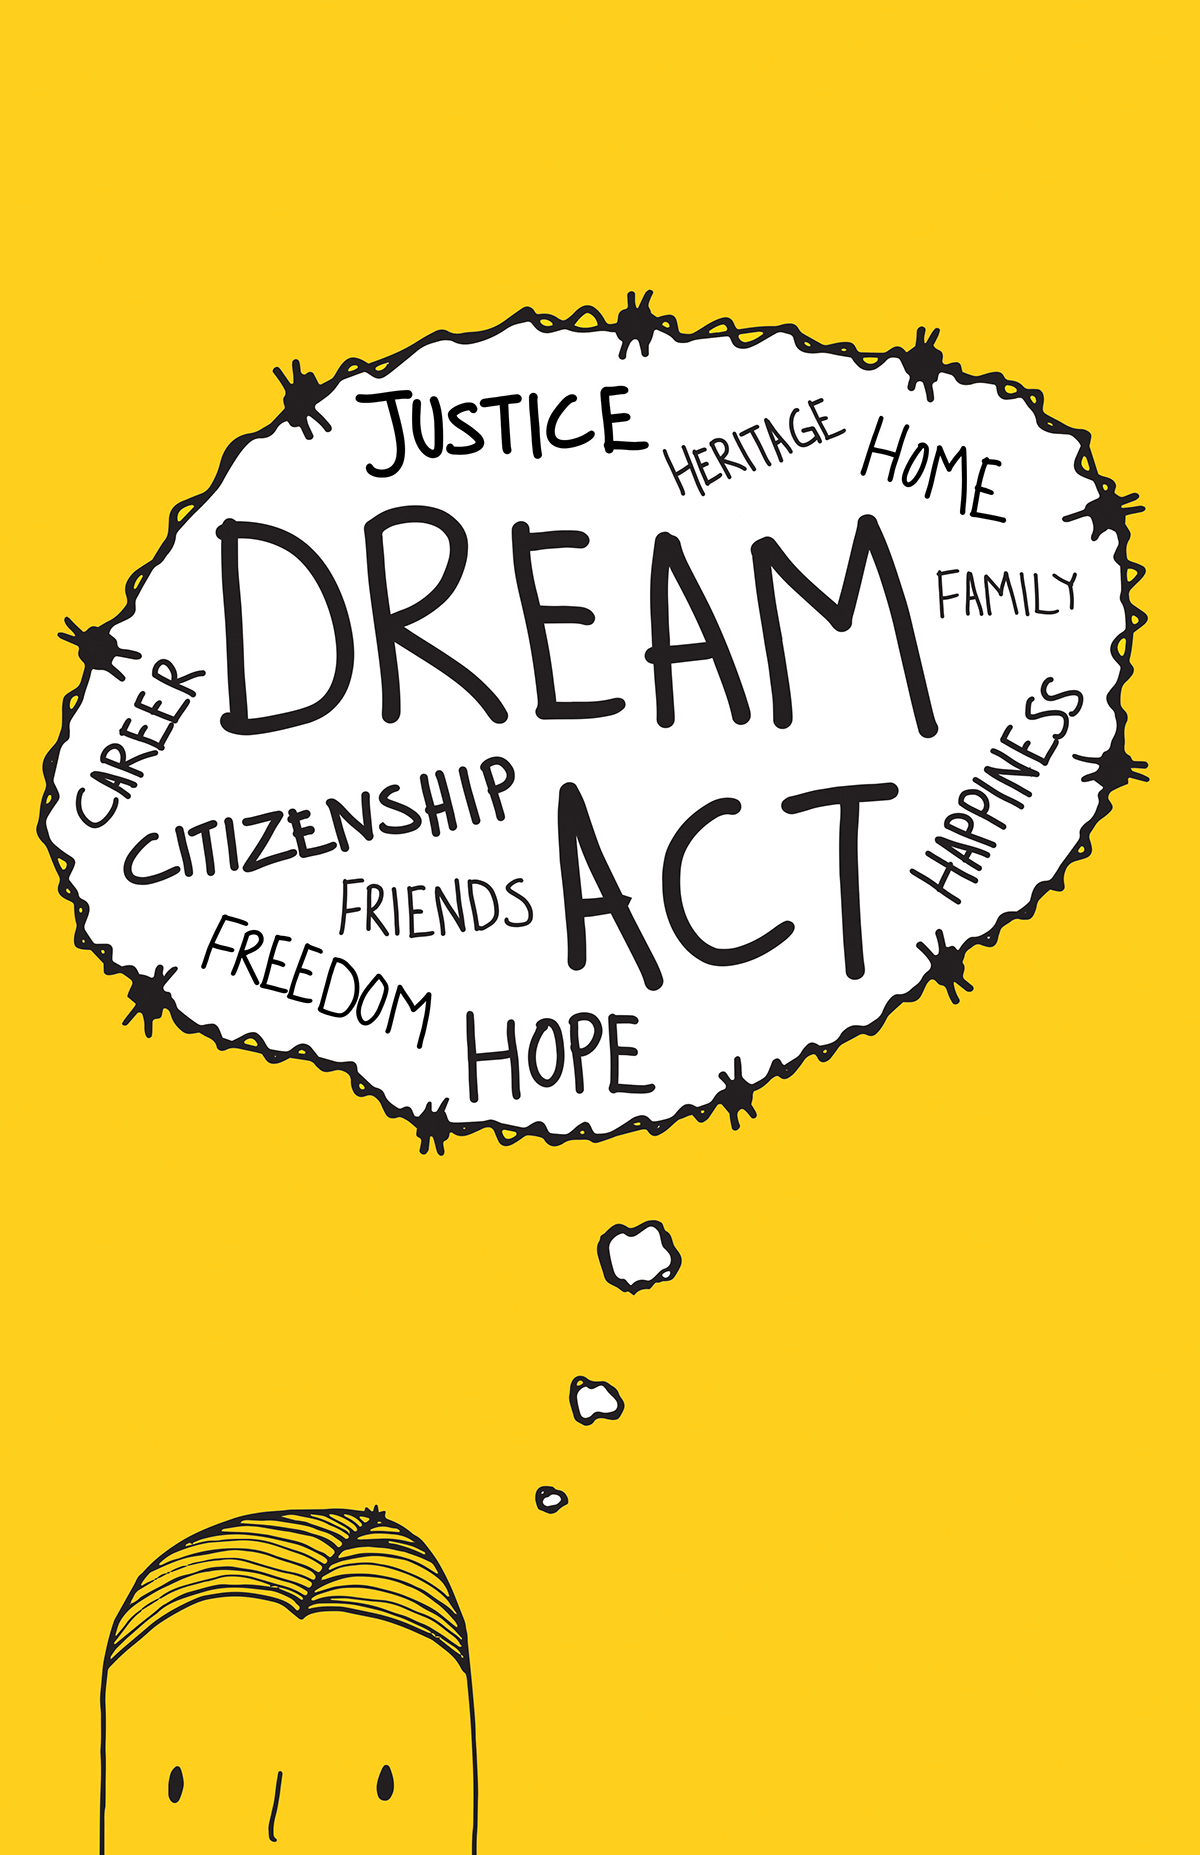 Immigration Dream Act freedom